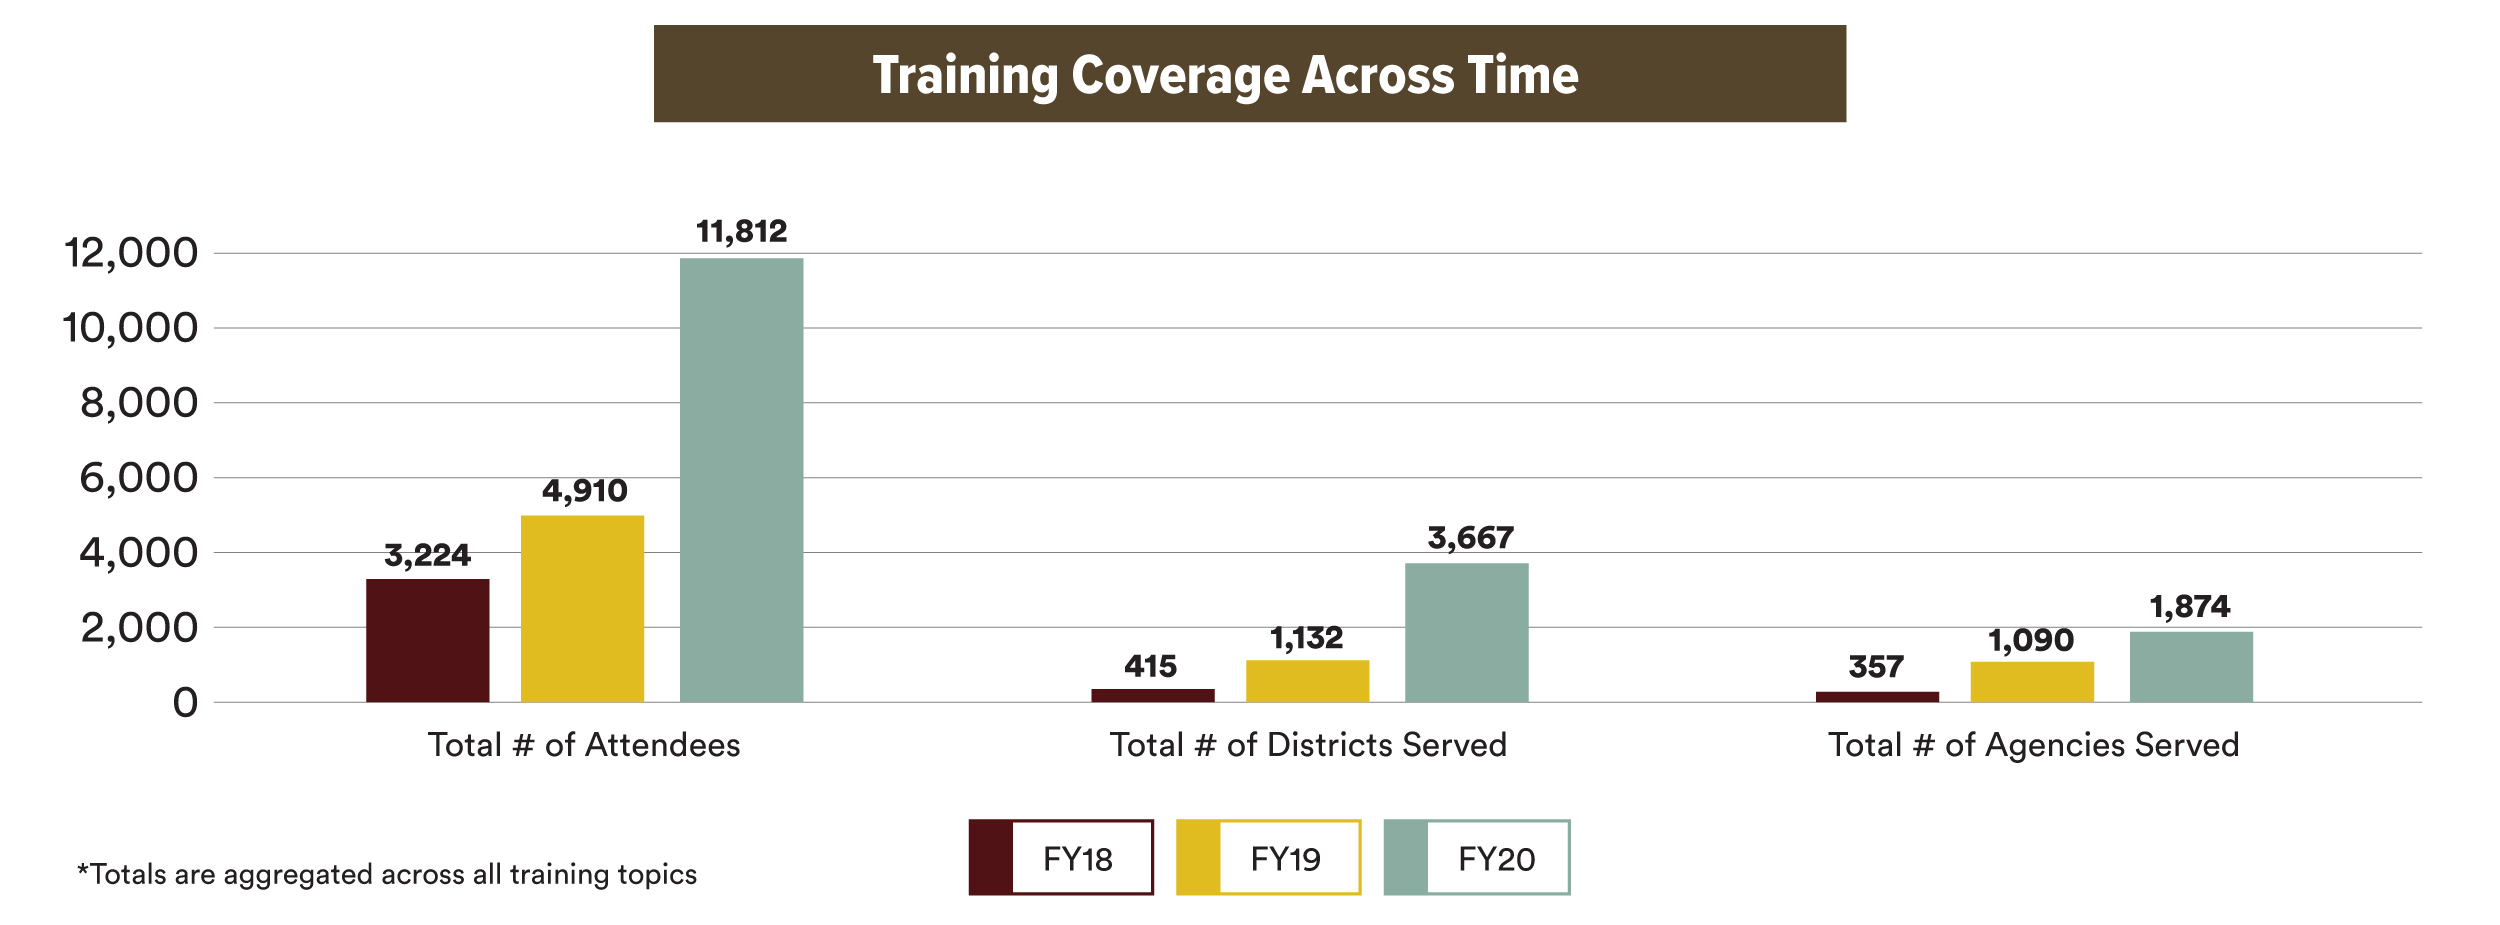 Graph reflecting increase in training coverage across time from 2018 to 2020